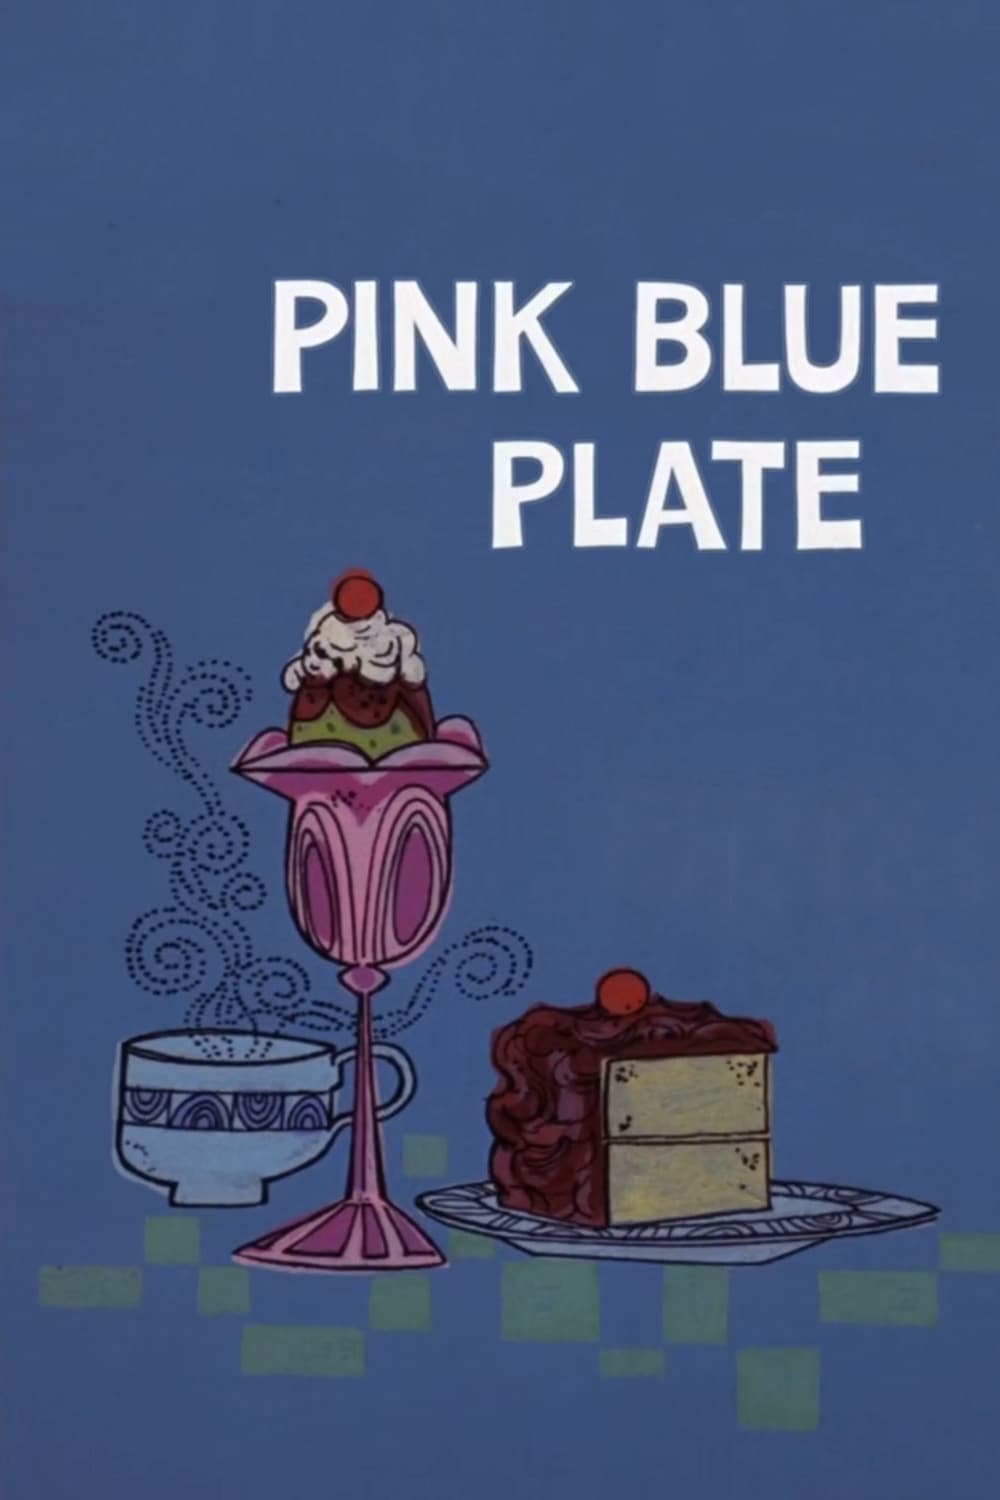 Pink Blue Plate (1971)